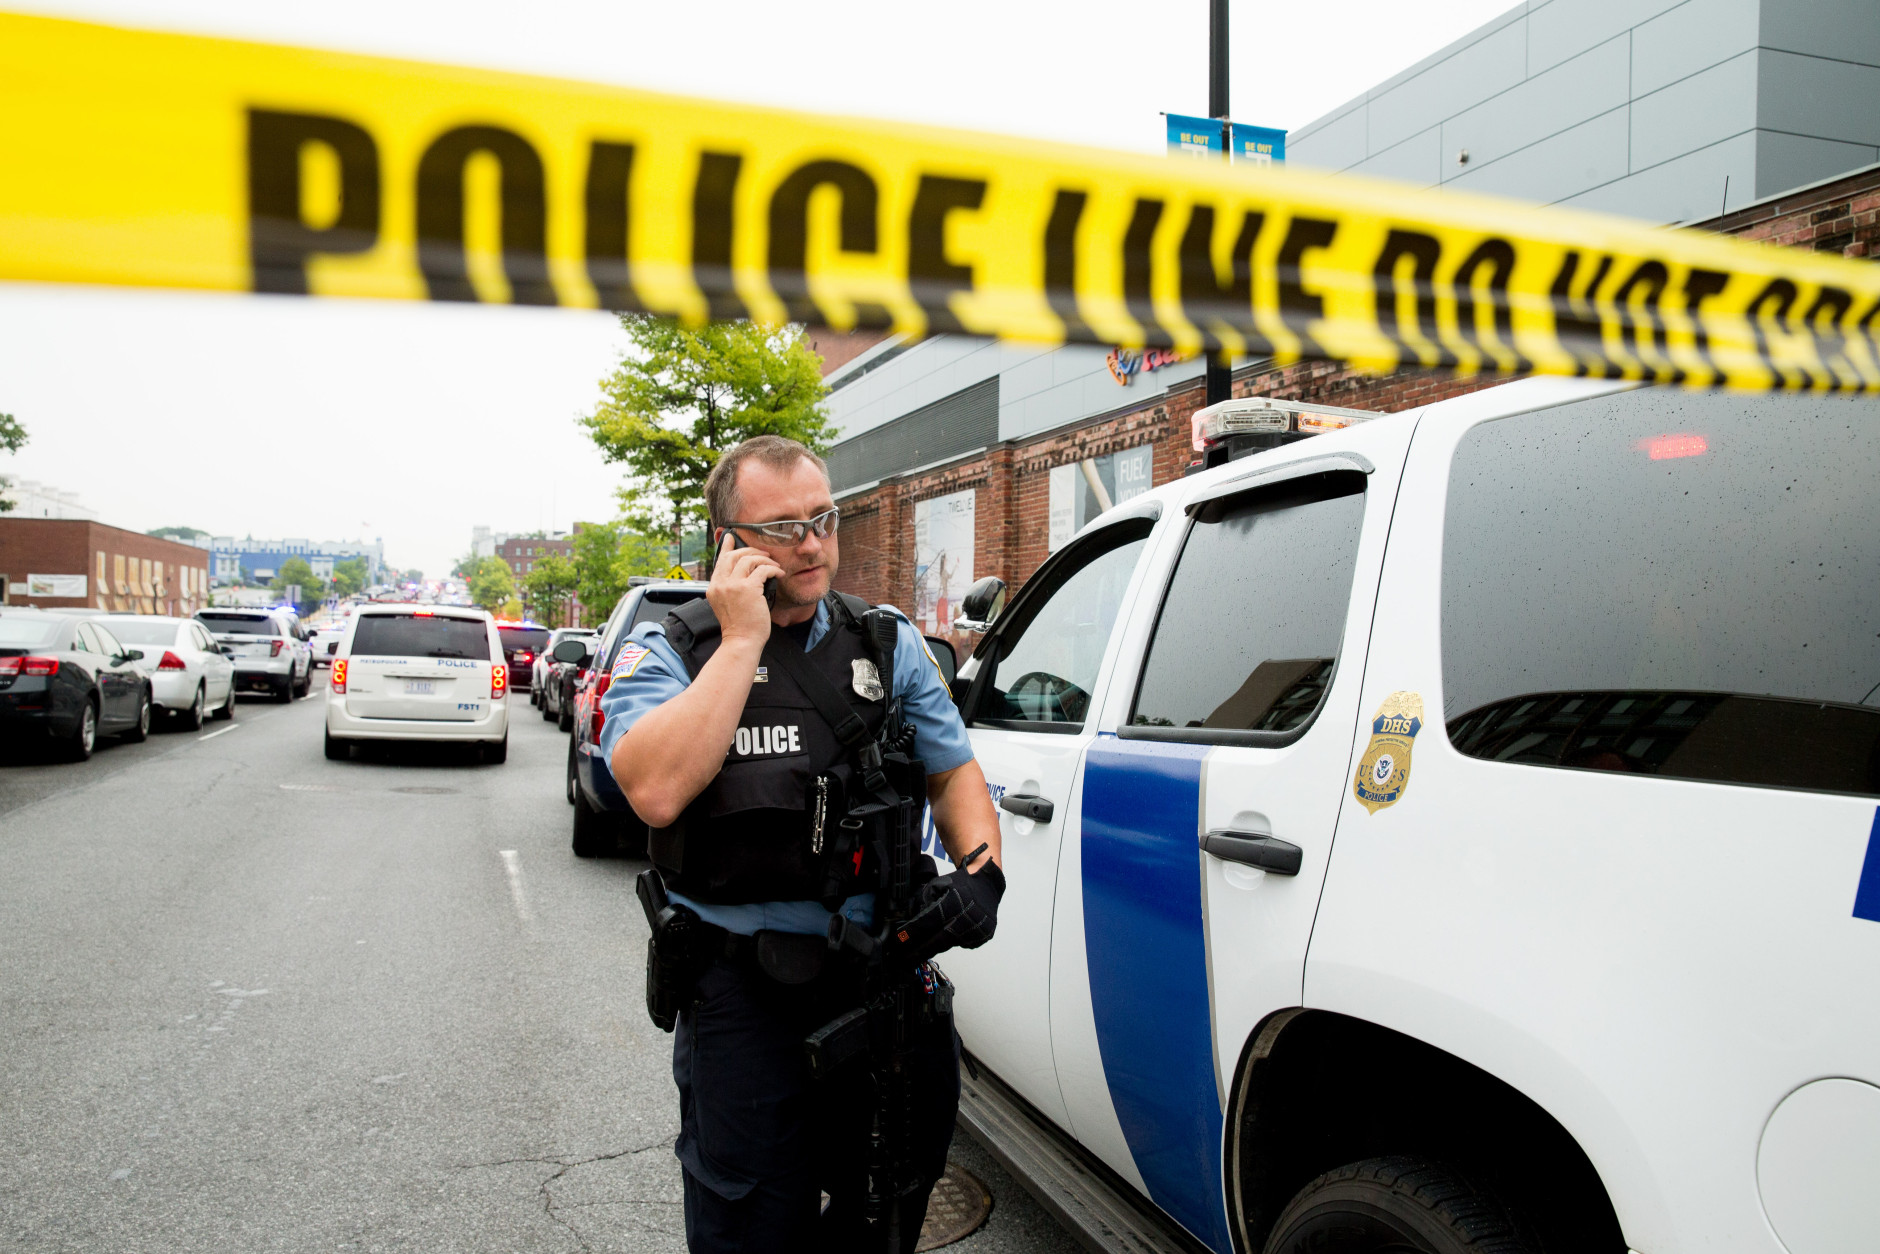 A police officer speaks on his phone as a large police presence gathers along M St. in Southeast Washington, Thursday, July 2, 2015, after an official said shots have been reported in a building on the Washington Navy Yard campus. (AP Photo/Andrew Harnik)